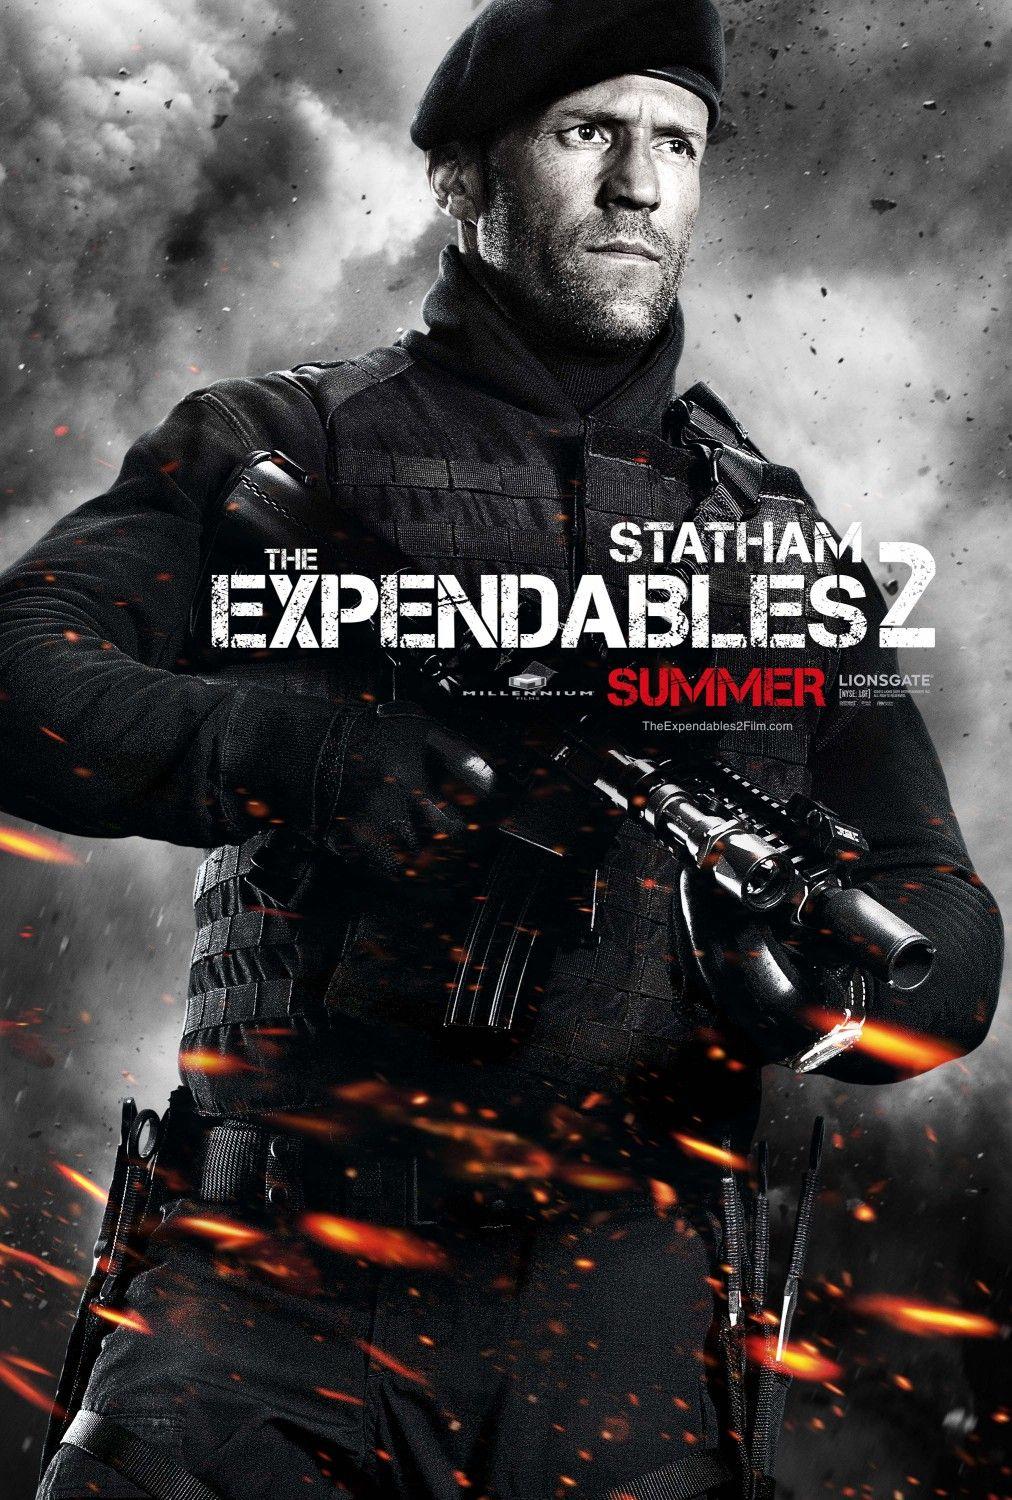 Movie Poster Inspiration The Expendables 2. Expendables movie